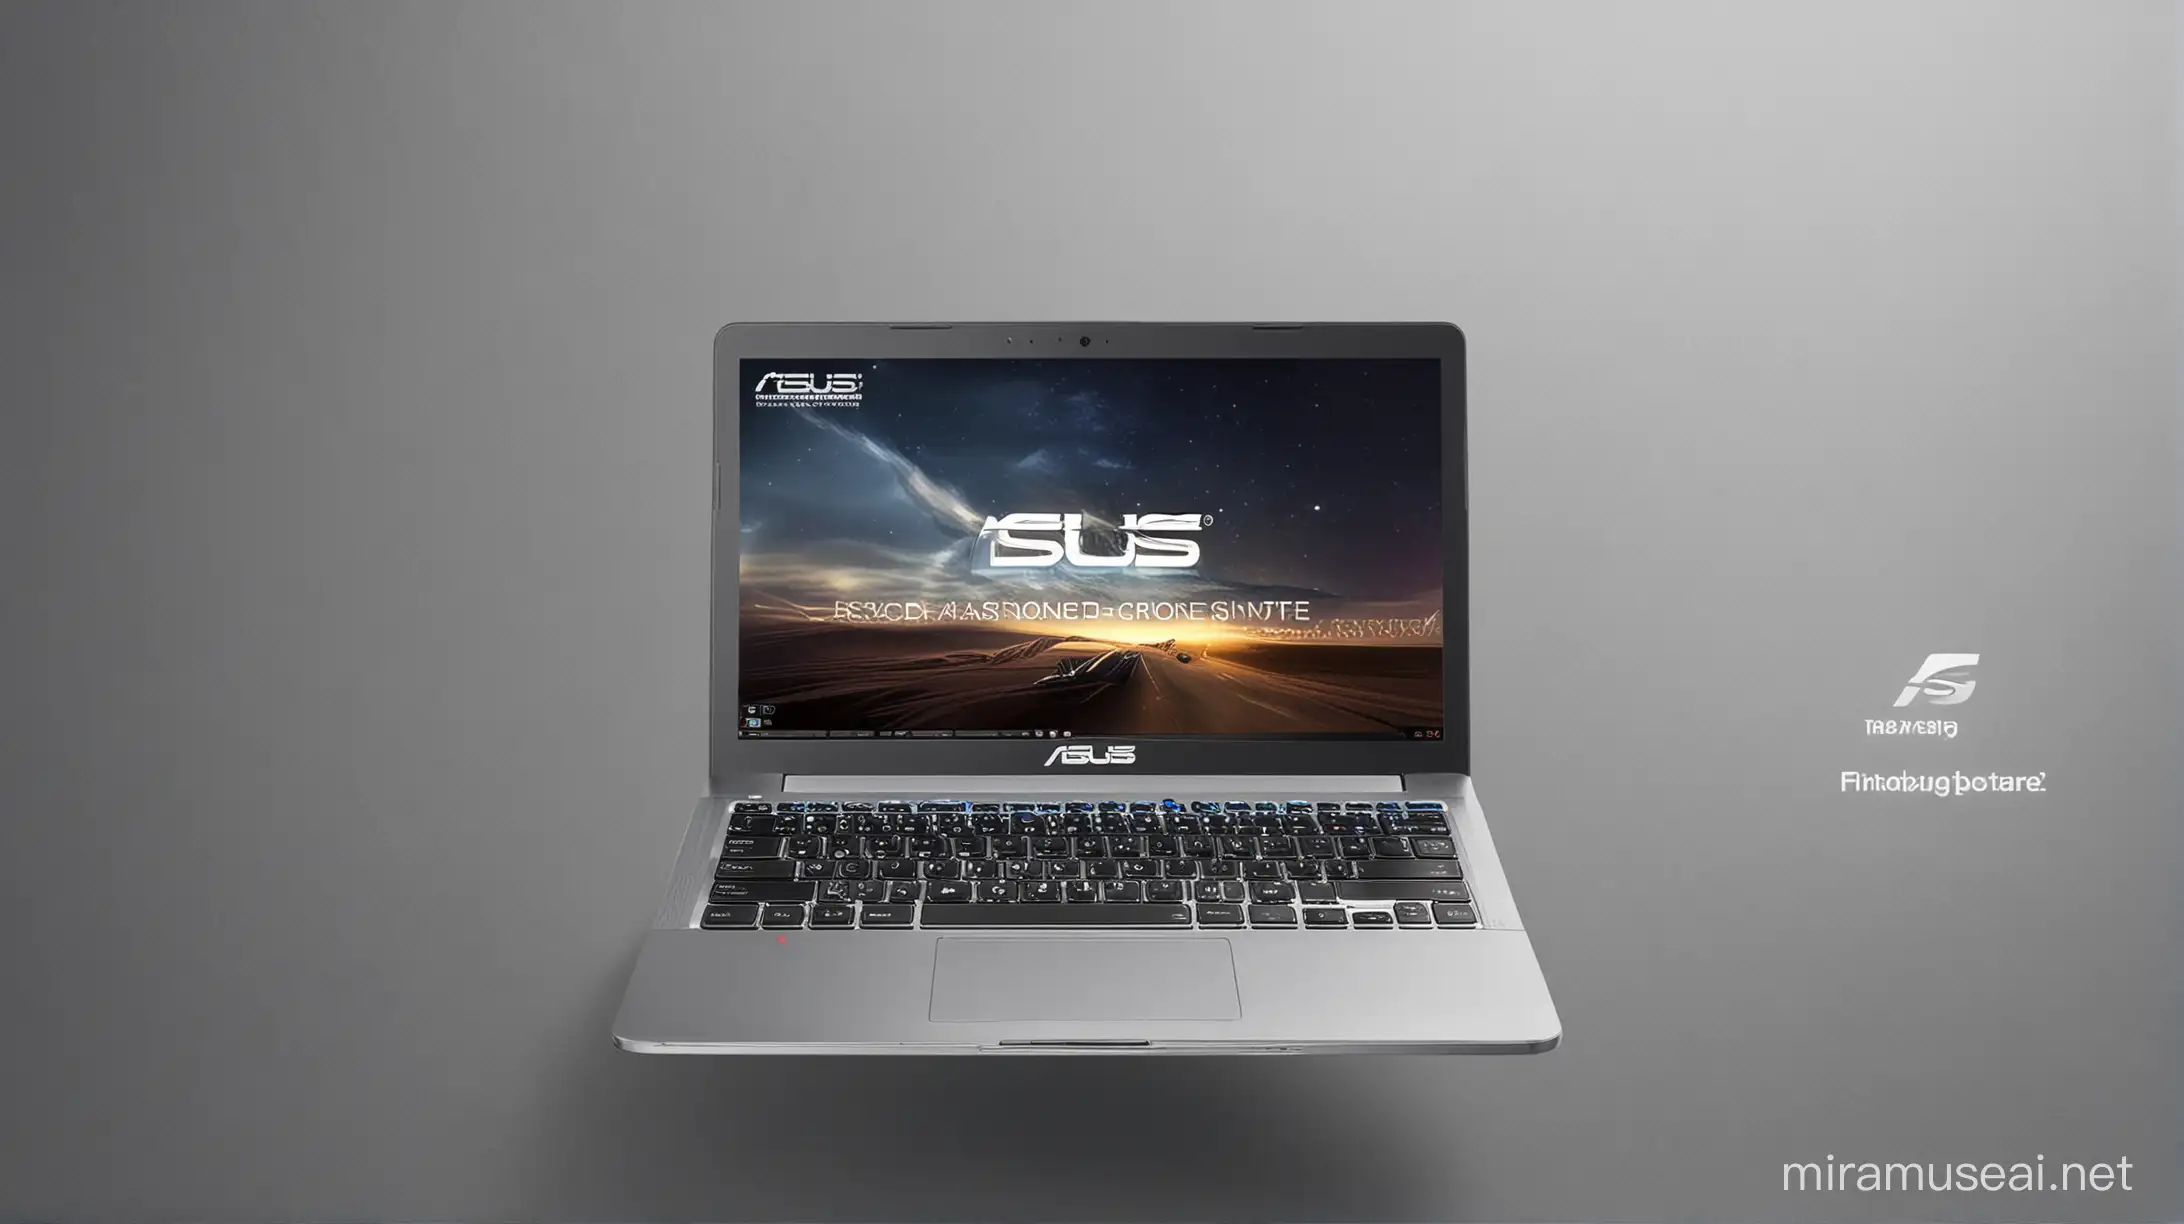 Marketing campaign theme for ASUS 